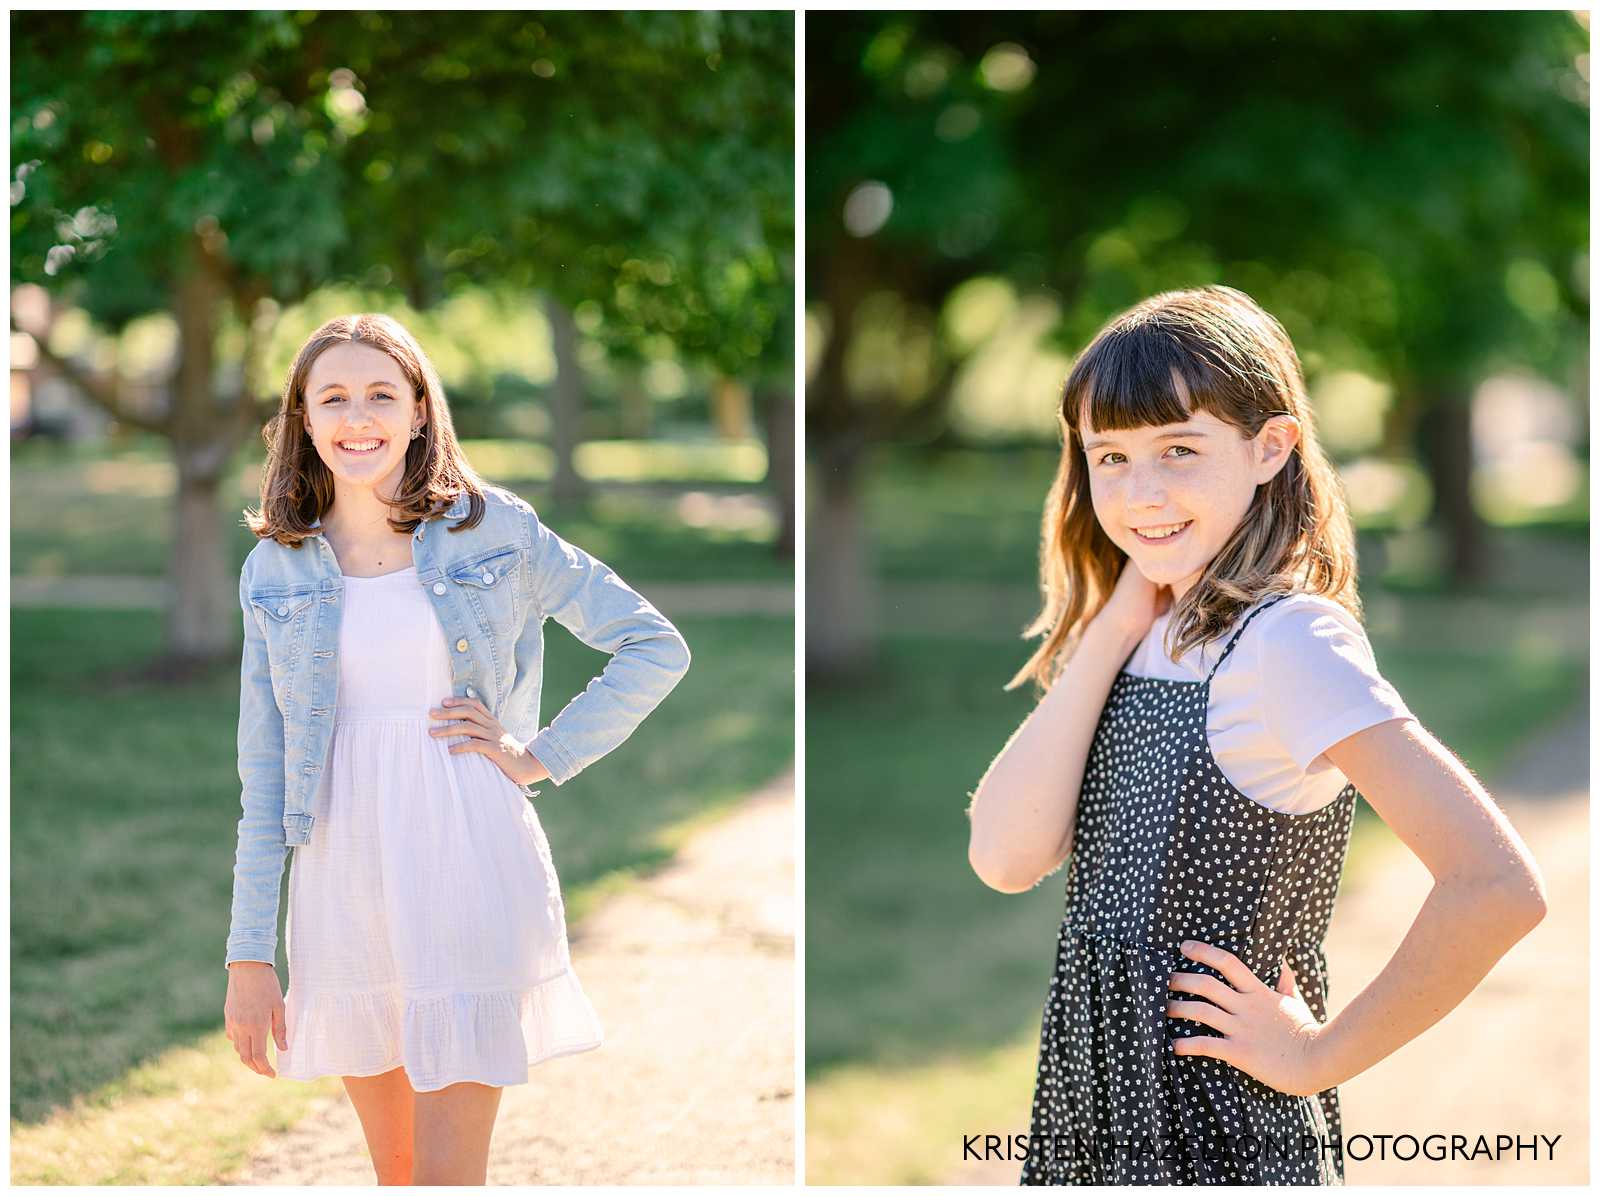 Portraits of two tween sisters. One sister is wearing a white midi dress with a denim jacket, and the other is wearing a black polka dot sundress. 